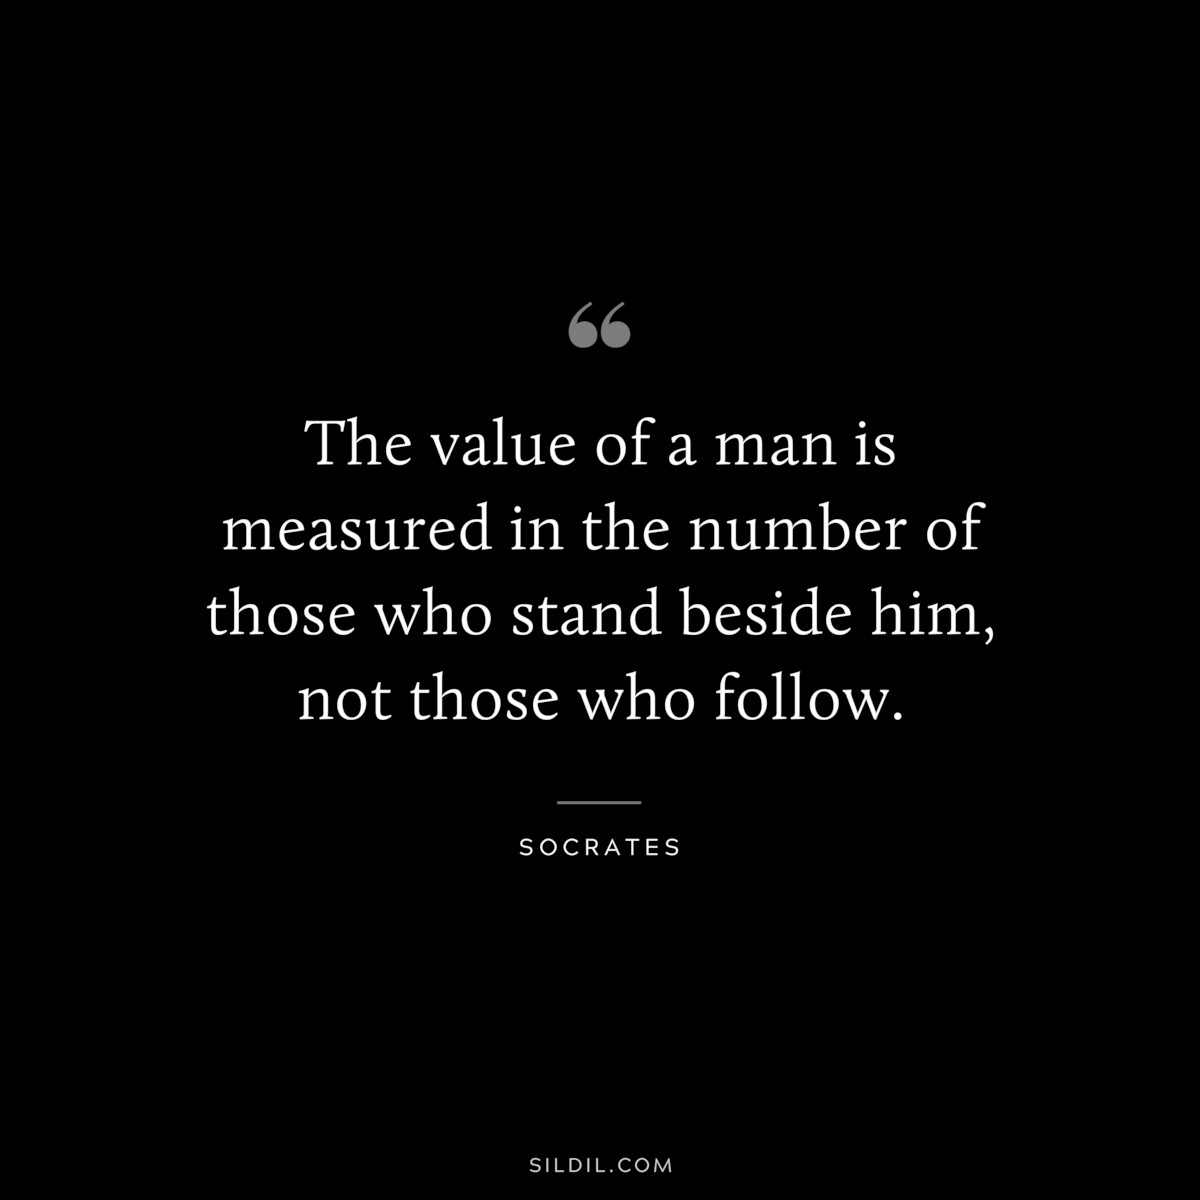 The value of a man is measured in the number of those who stand beside him, not those who follow. ― Socrates